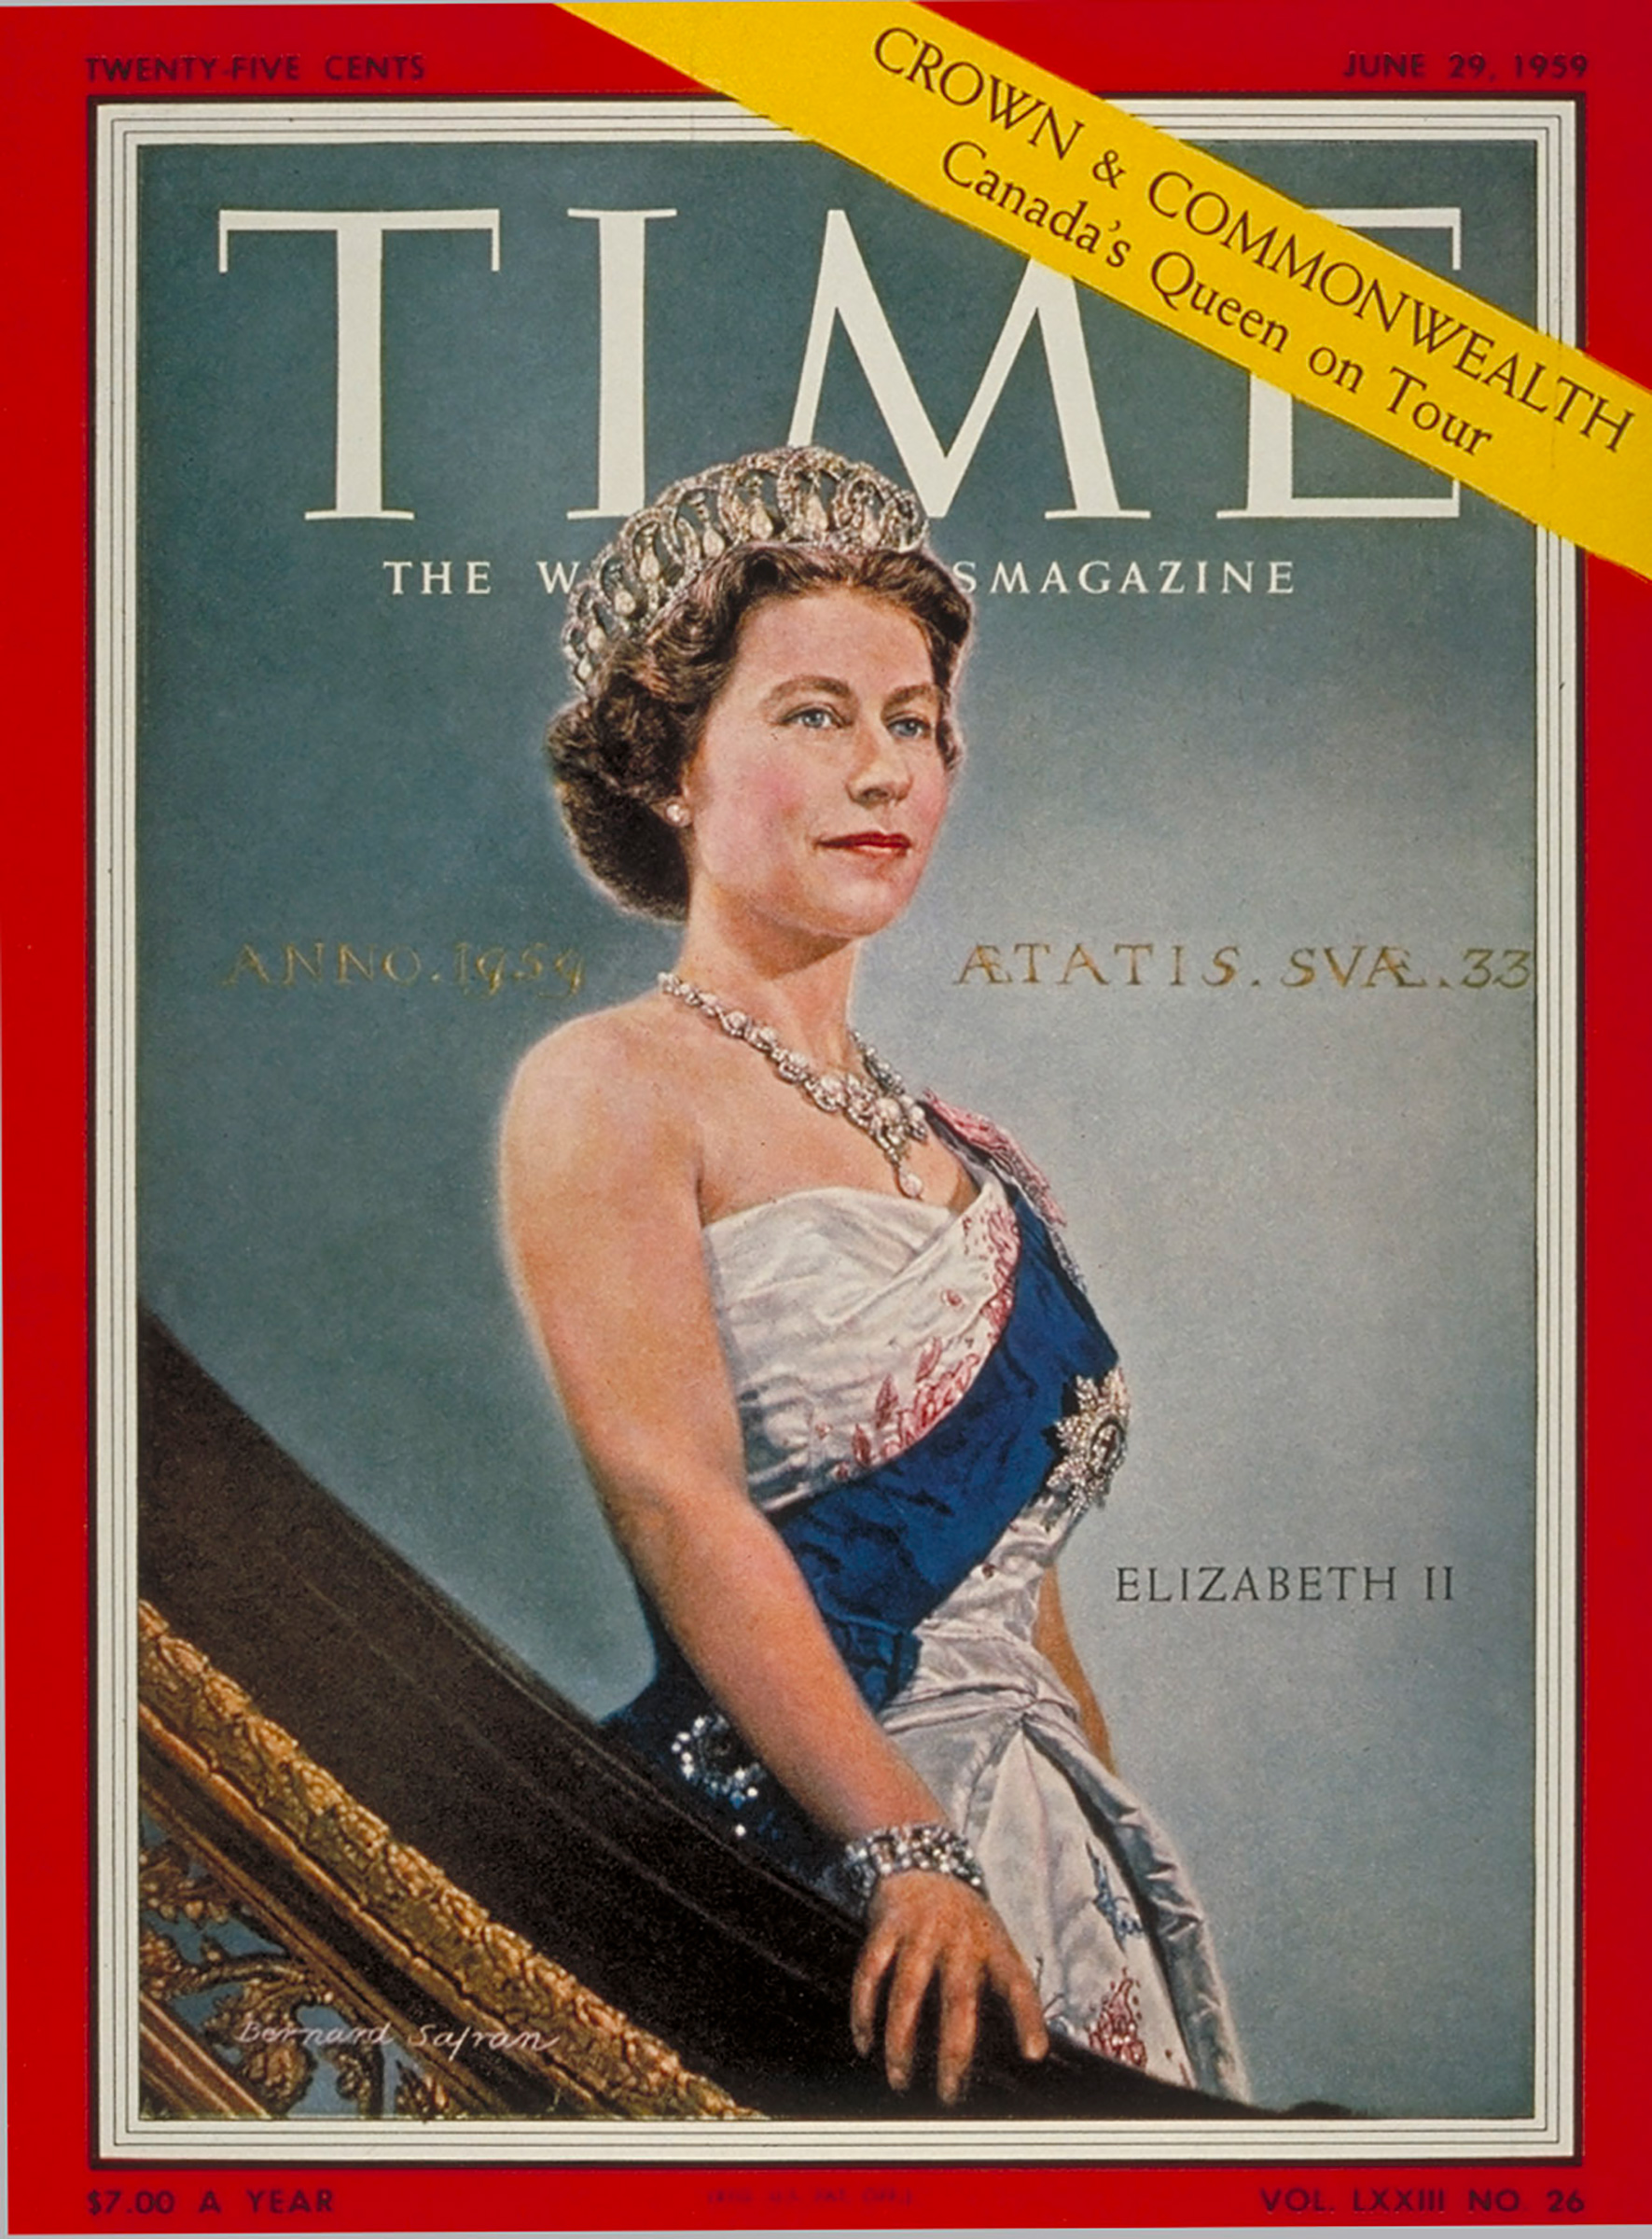 The Queen on the June 29, 1959, cover of TIME